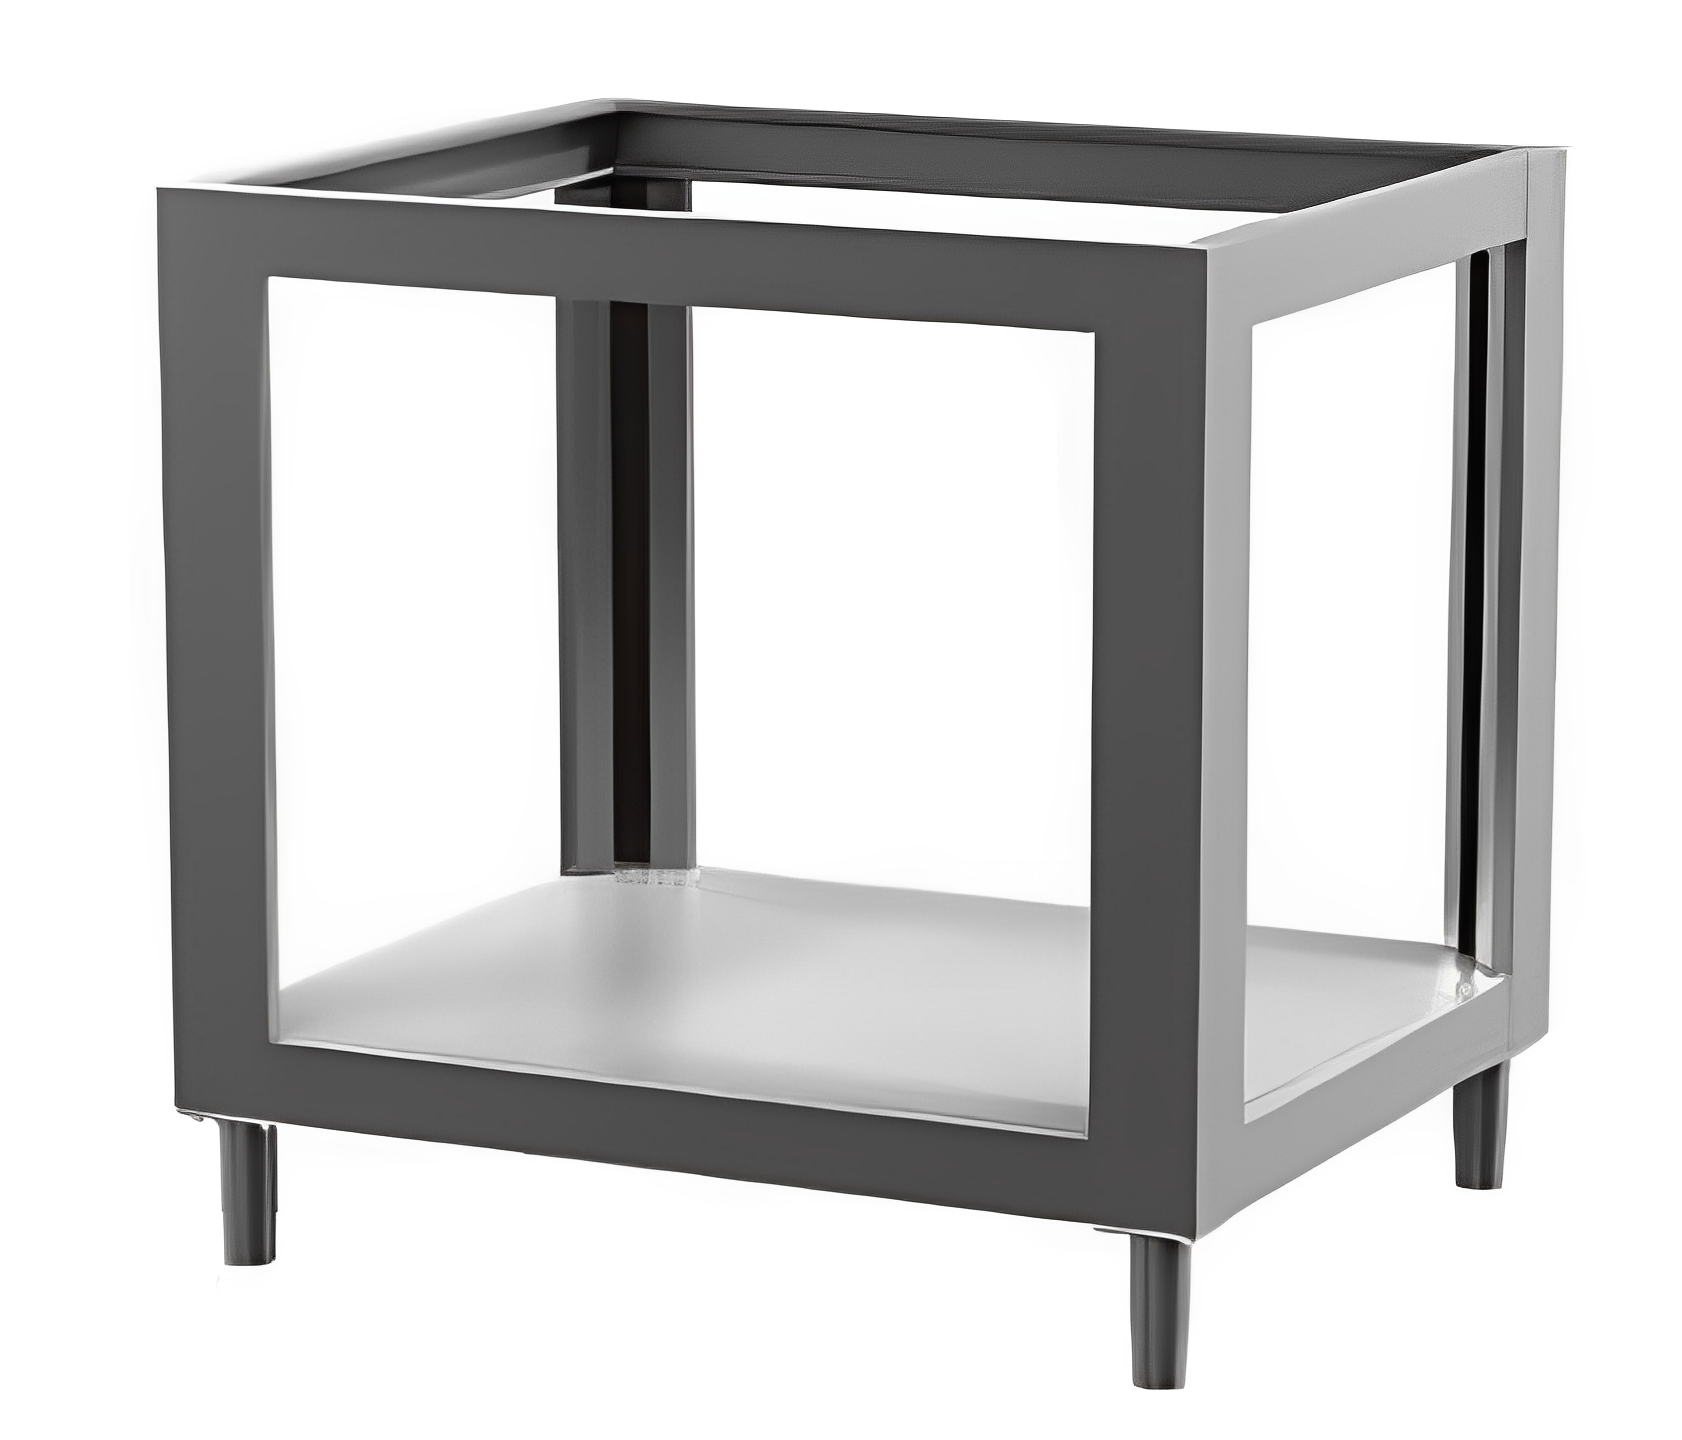 PIZZAGROUP S4 Stands in stainless steel, with service shelf.